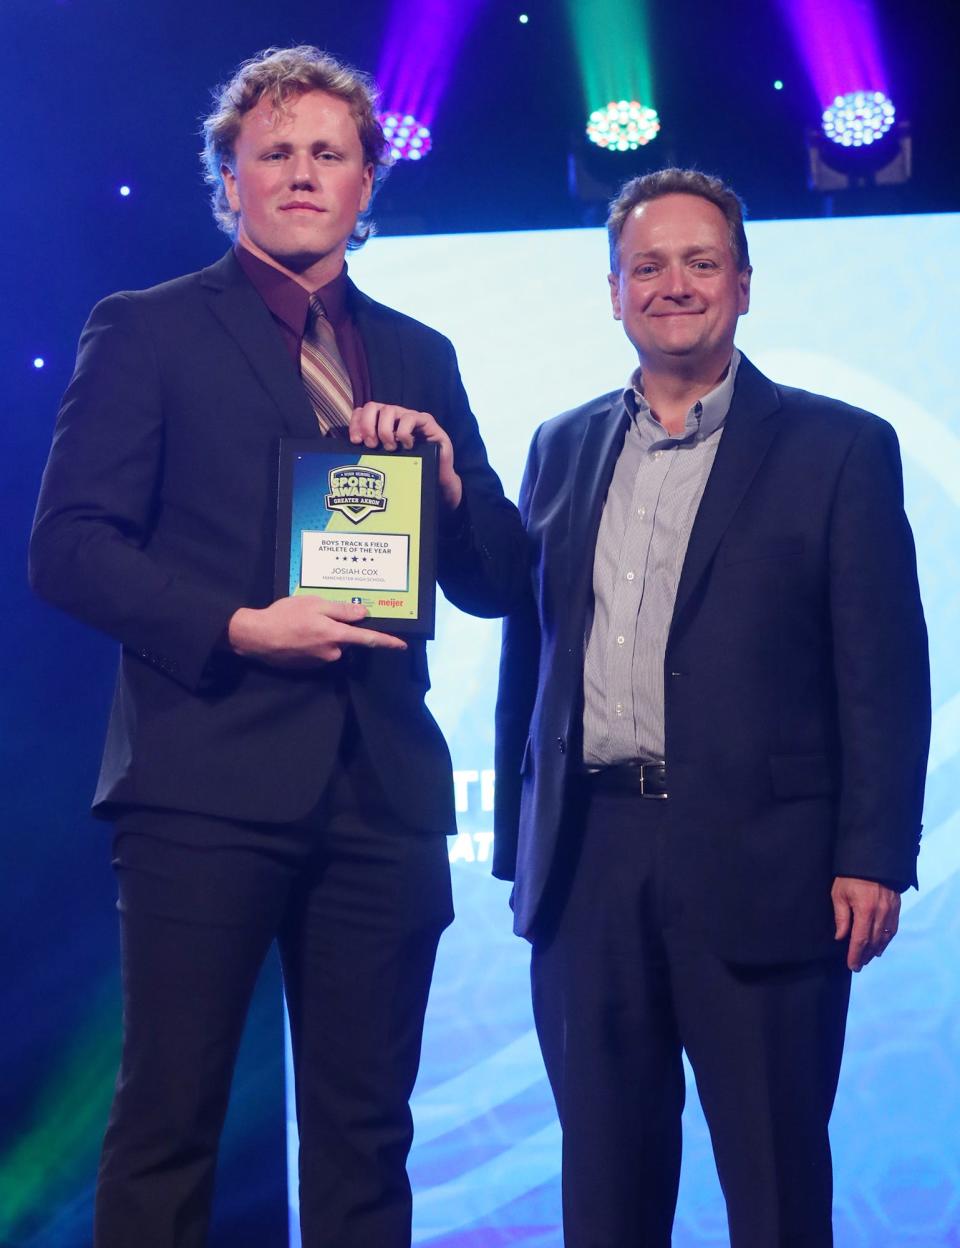 Manchester High's Josiah Cox Greater Akron Boys Track and Field Player of the Year with Michael Shearer Akron Beacon Journal editor at the High School Sports All-Star Awards at the Civic Theatre in Akron on Friday.